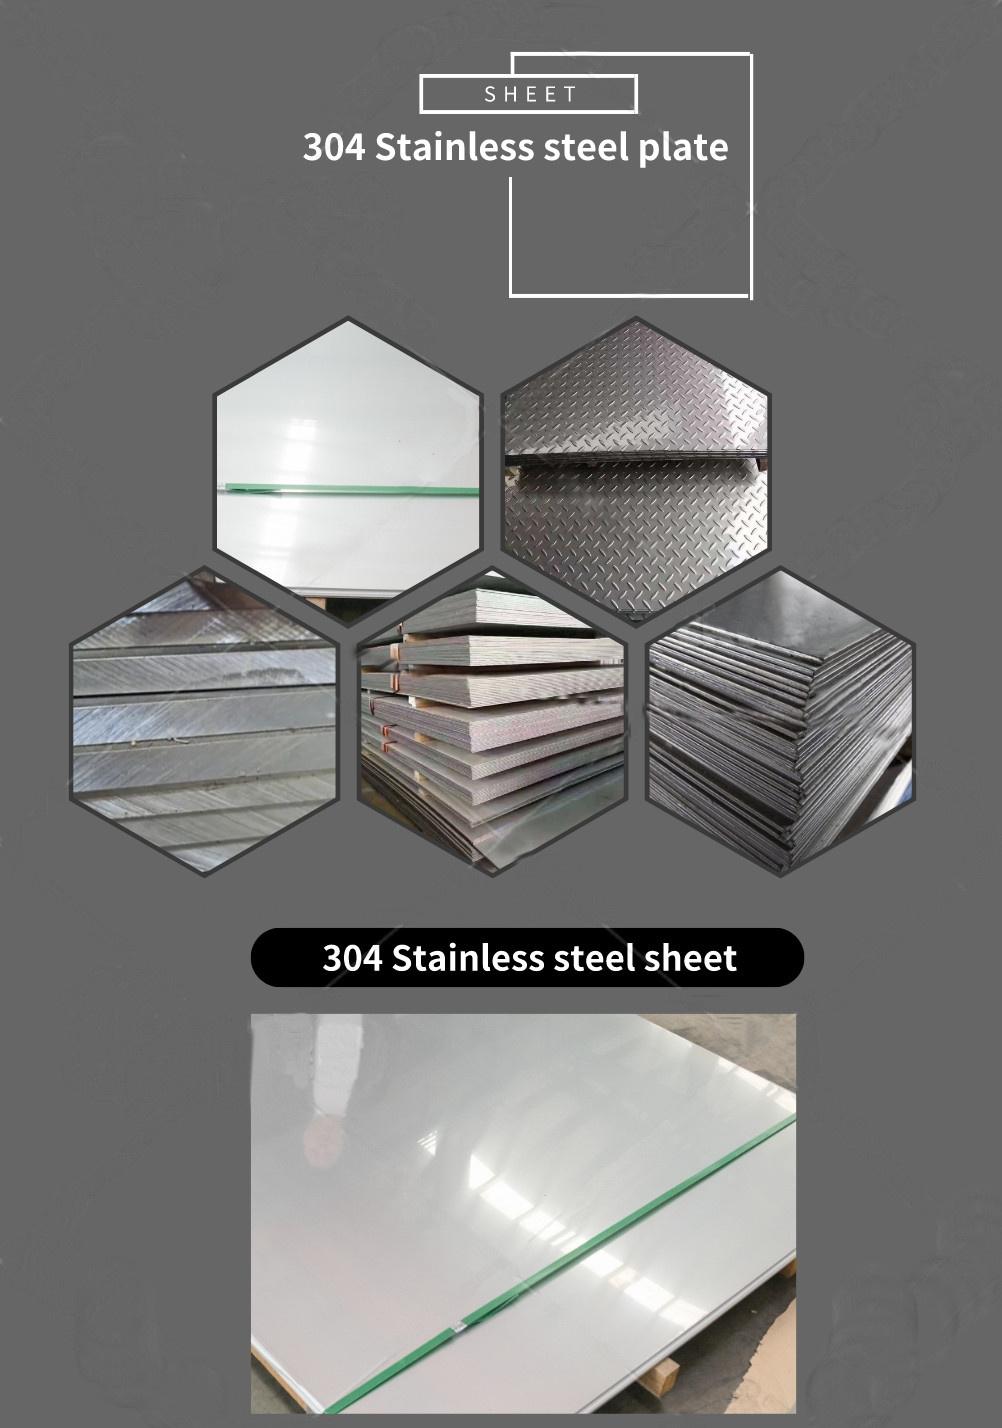 ASTM/GB/JIS 321 347 304 Hot Rolled Stainless Steel Plate for Boat Board